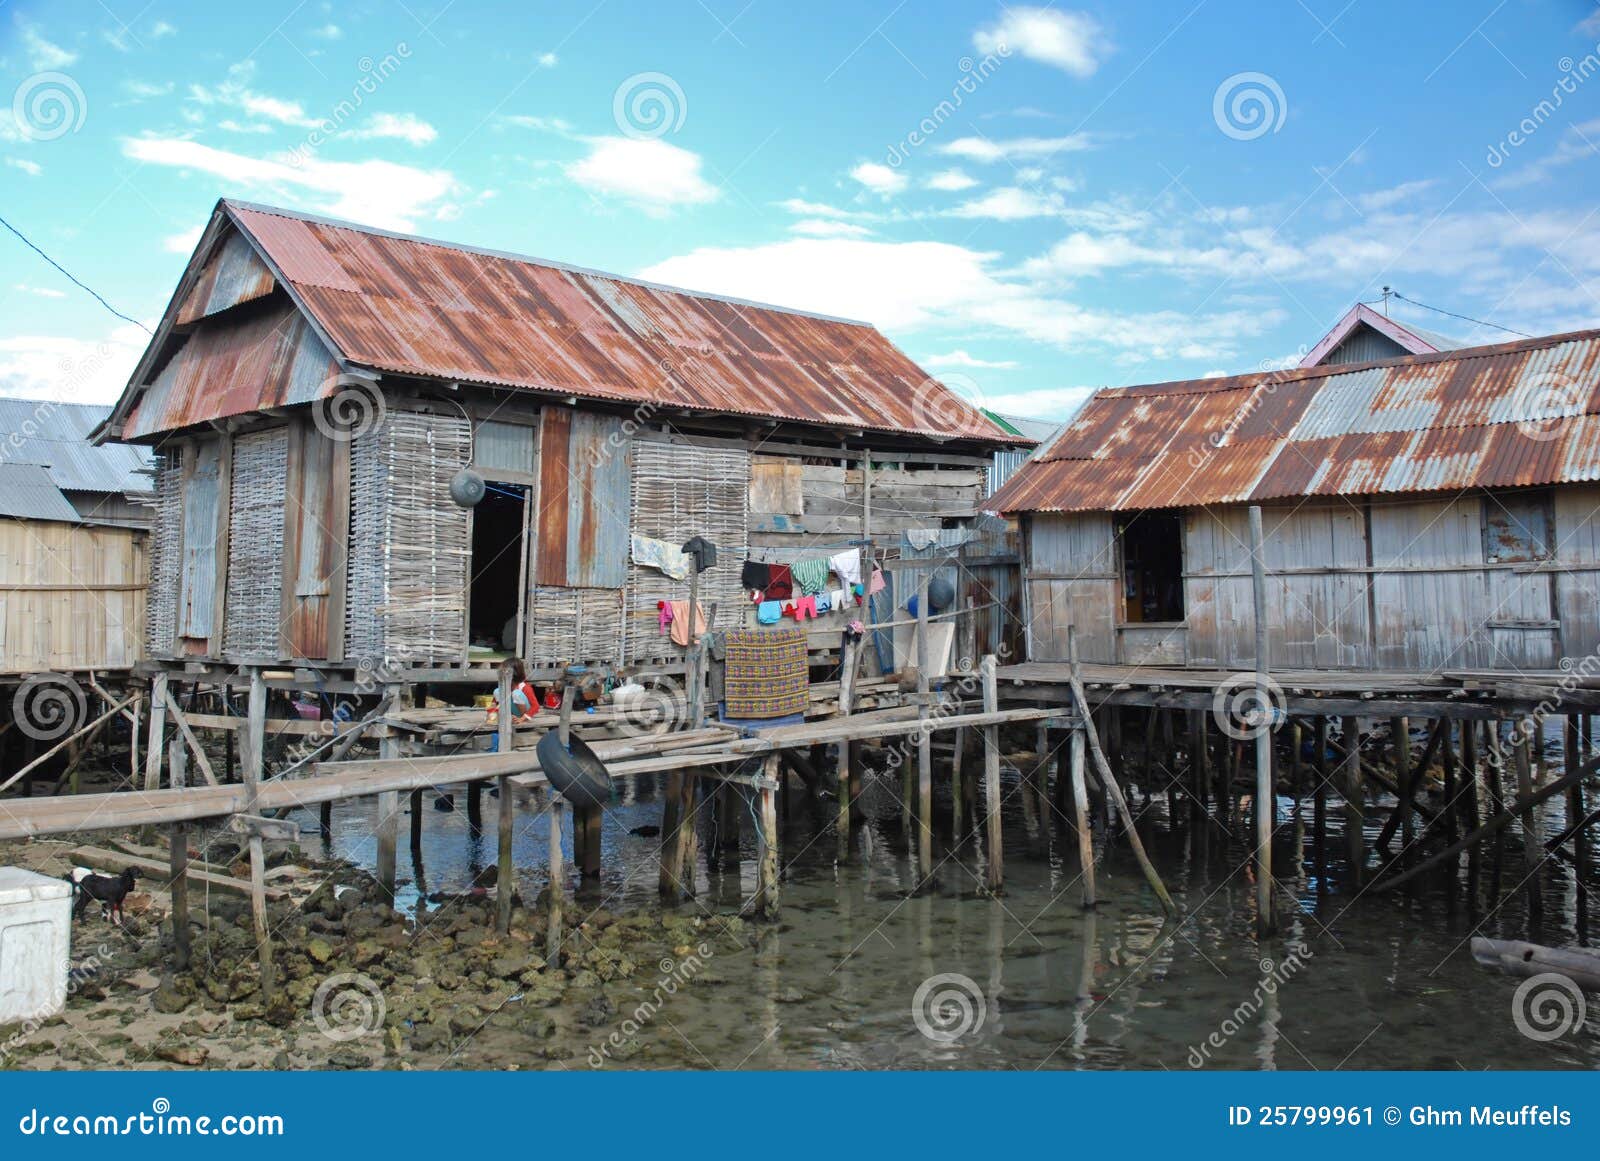 residential houses on stilts, maumere, indonesia